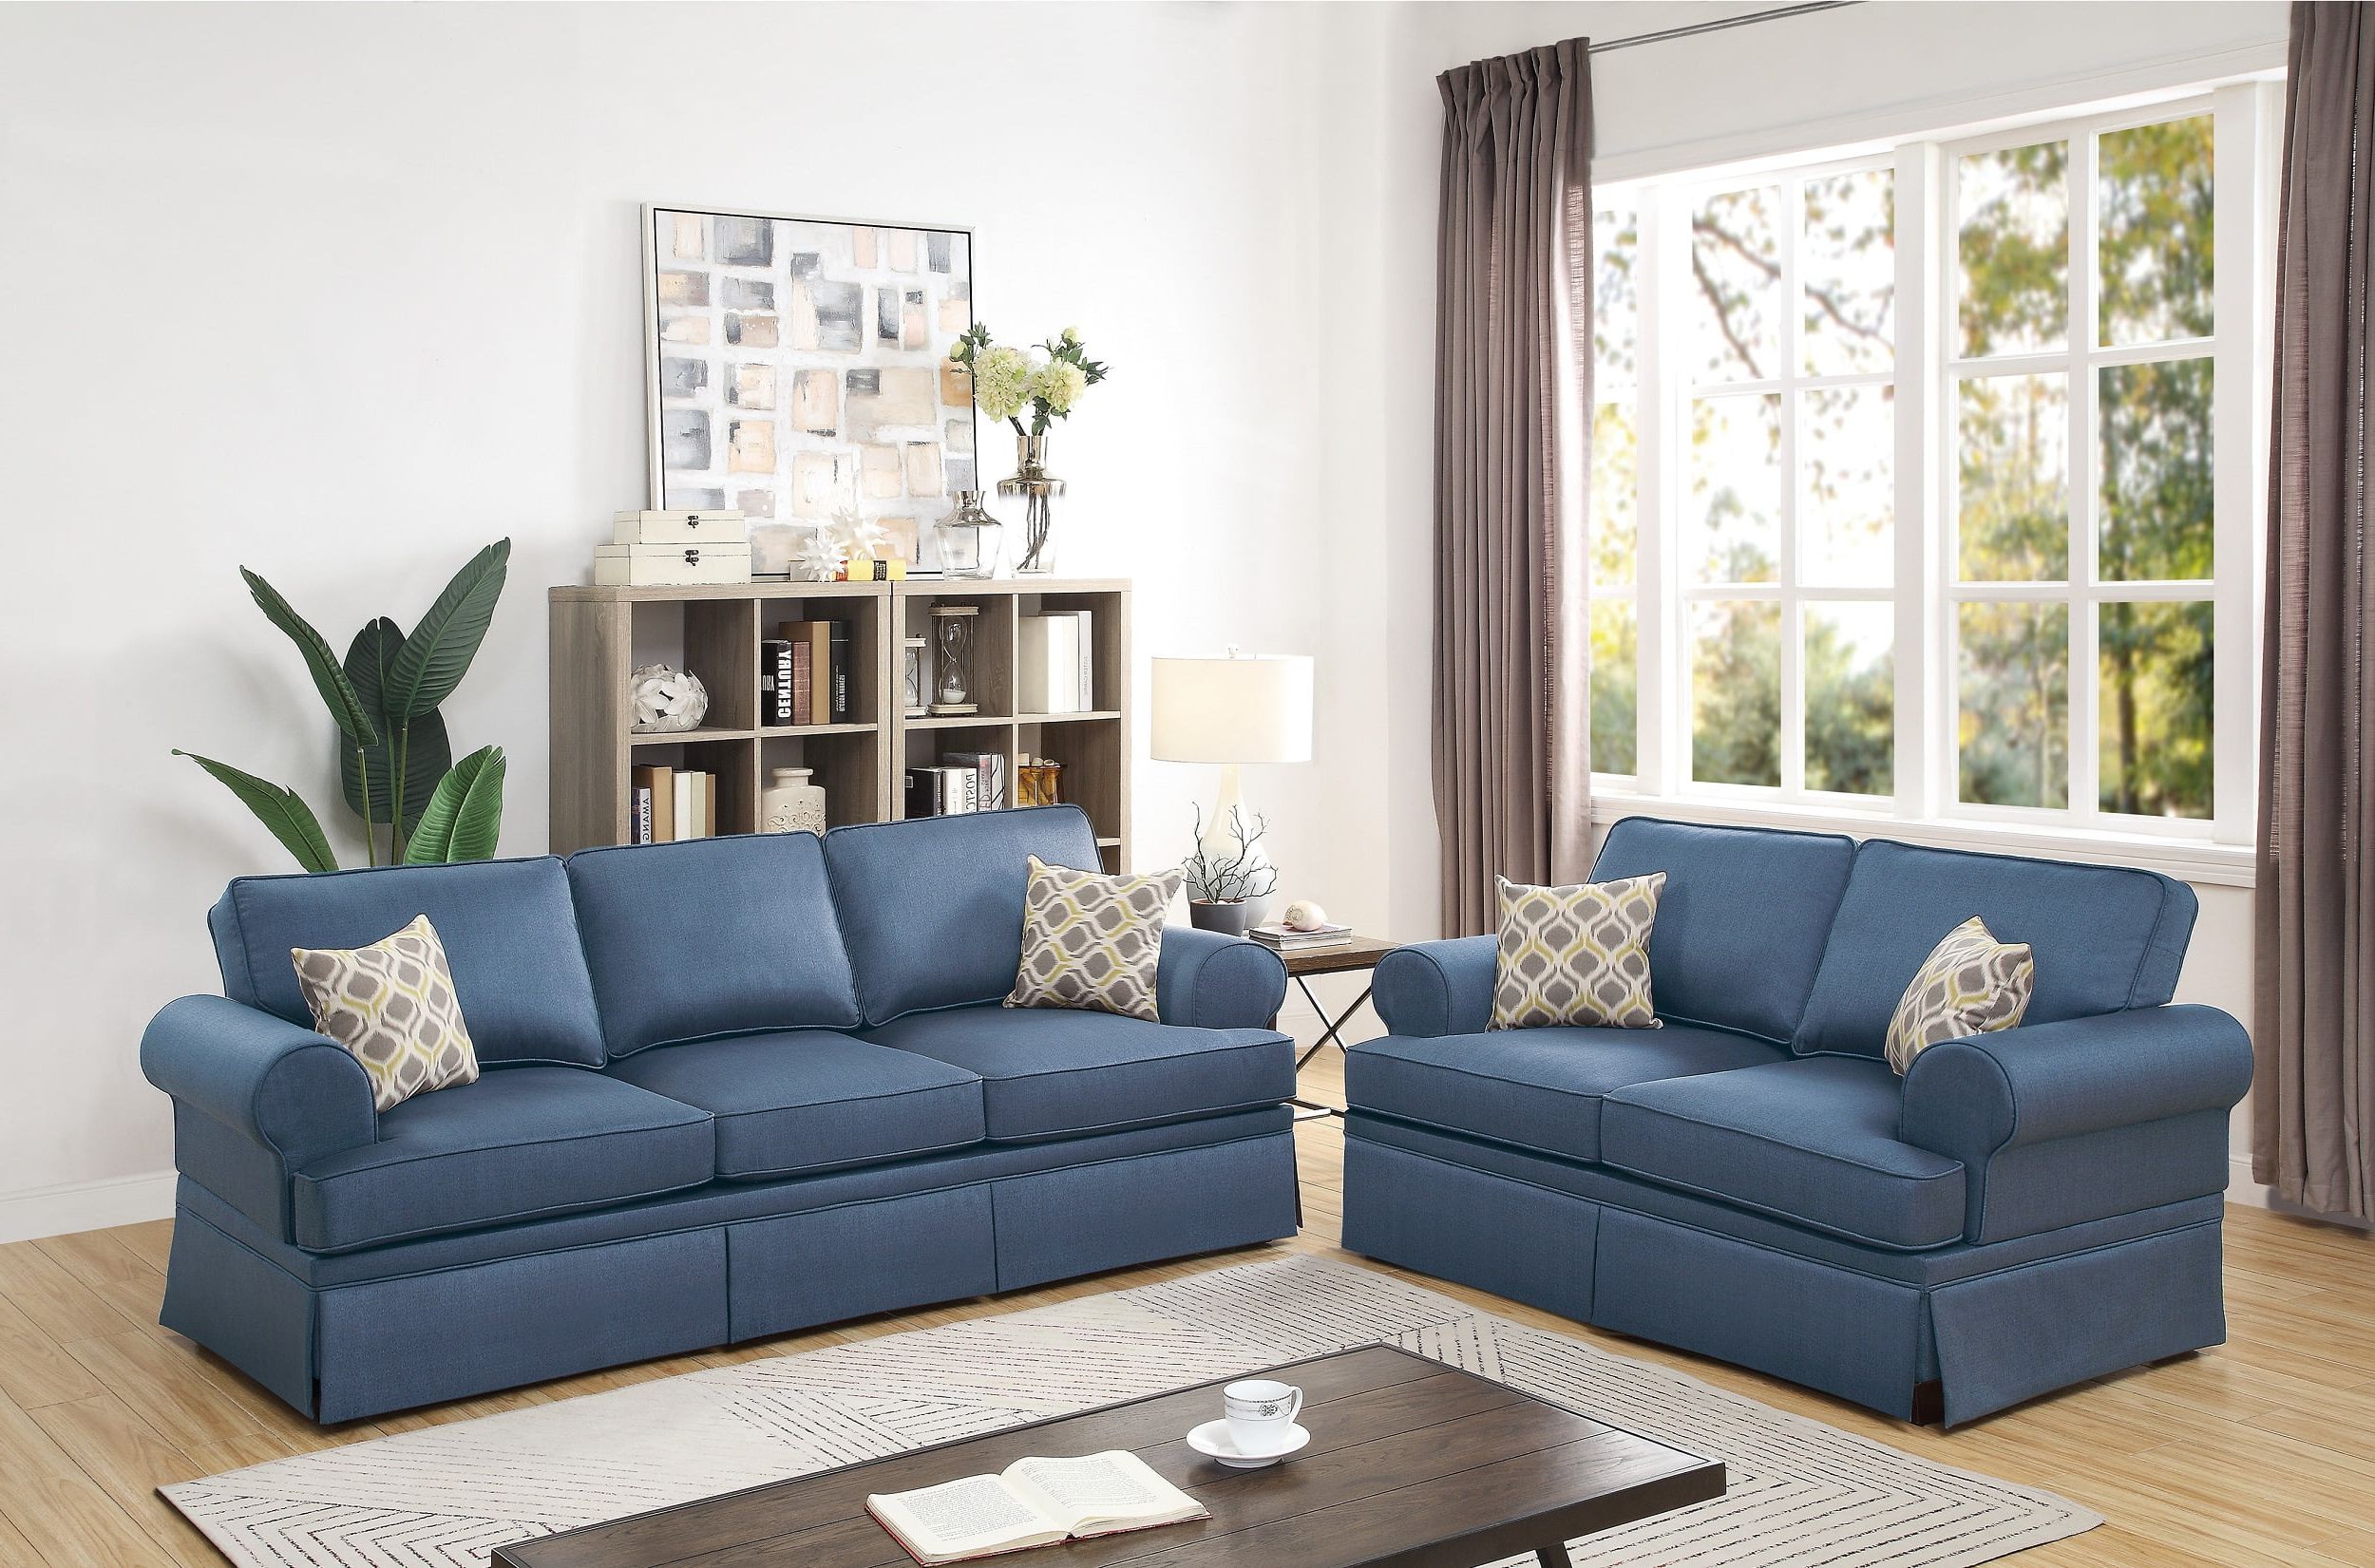 Classic Comfort Cozy Living Room 2pc Sofa Set Sofa And Loveseat Blue Throughout Sofas For Living Rooms (Gallery 1 of 20)